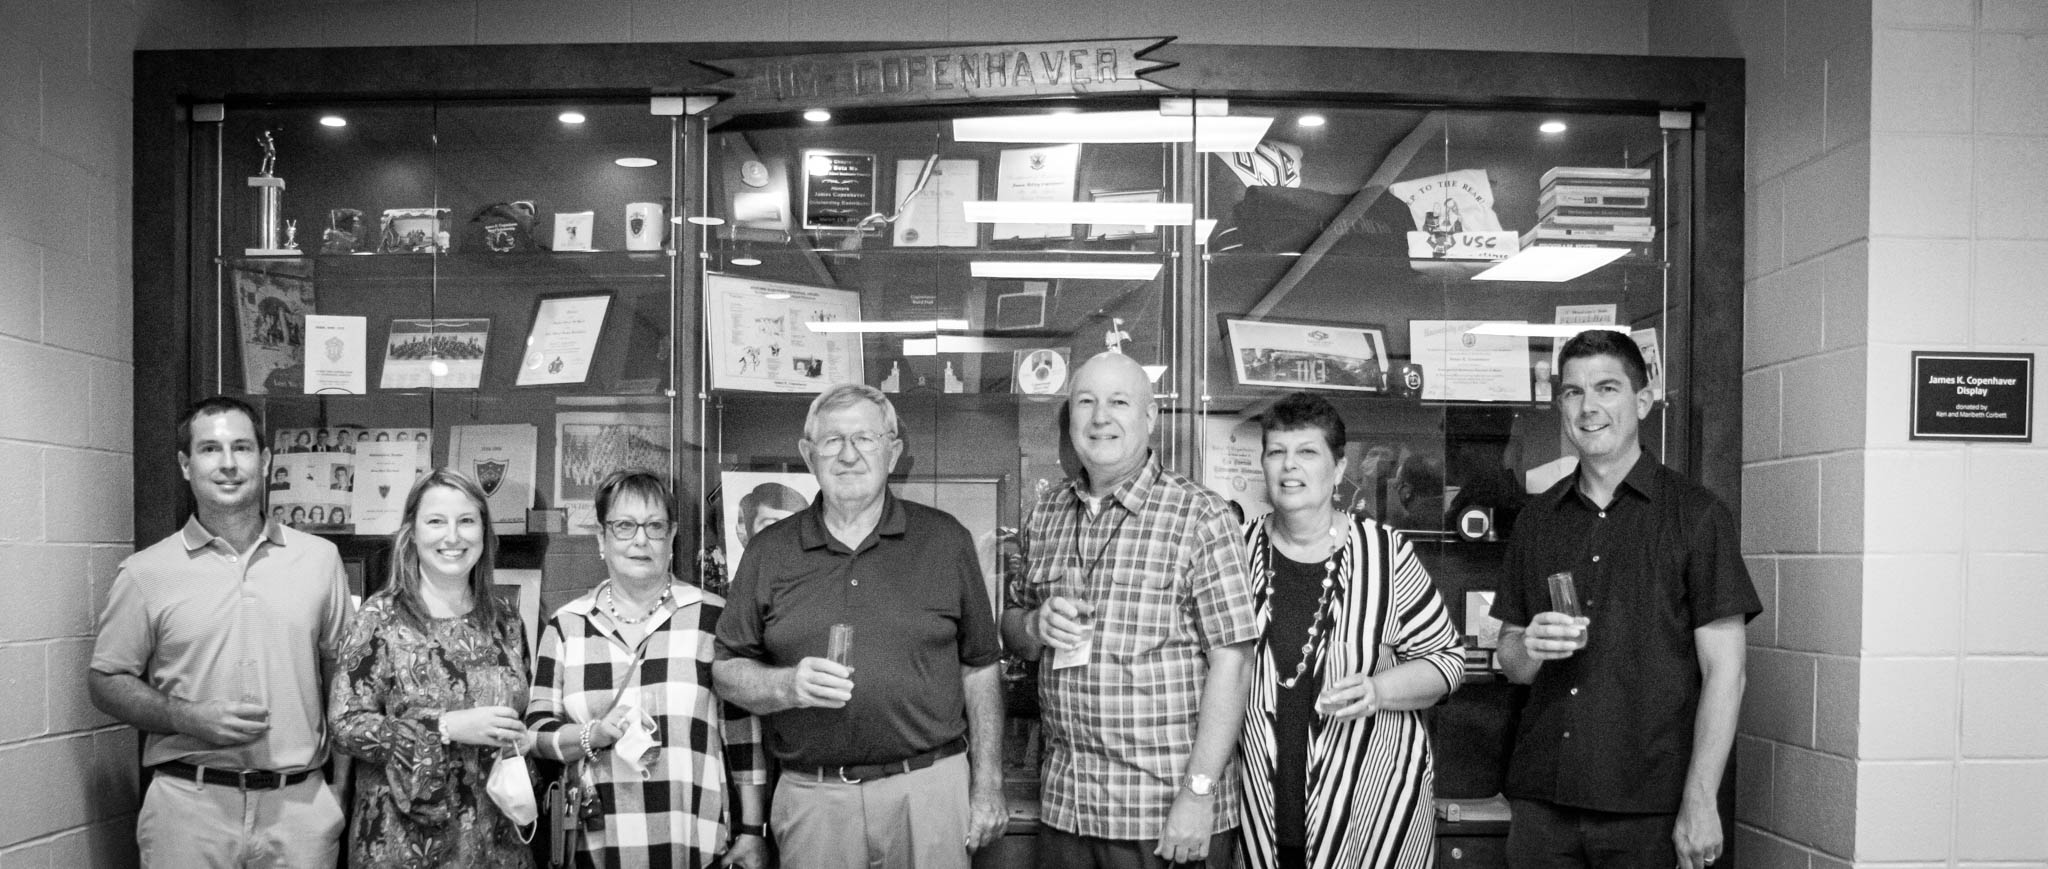 Ken Corbett stands with Director Cormac Cannon and the family of James K. Copenhaver in front of the display case 